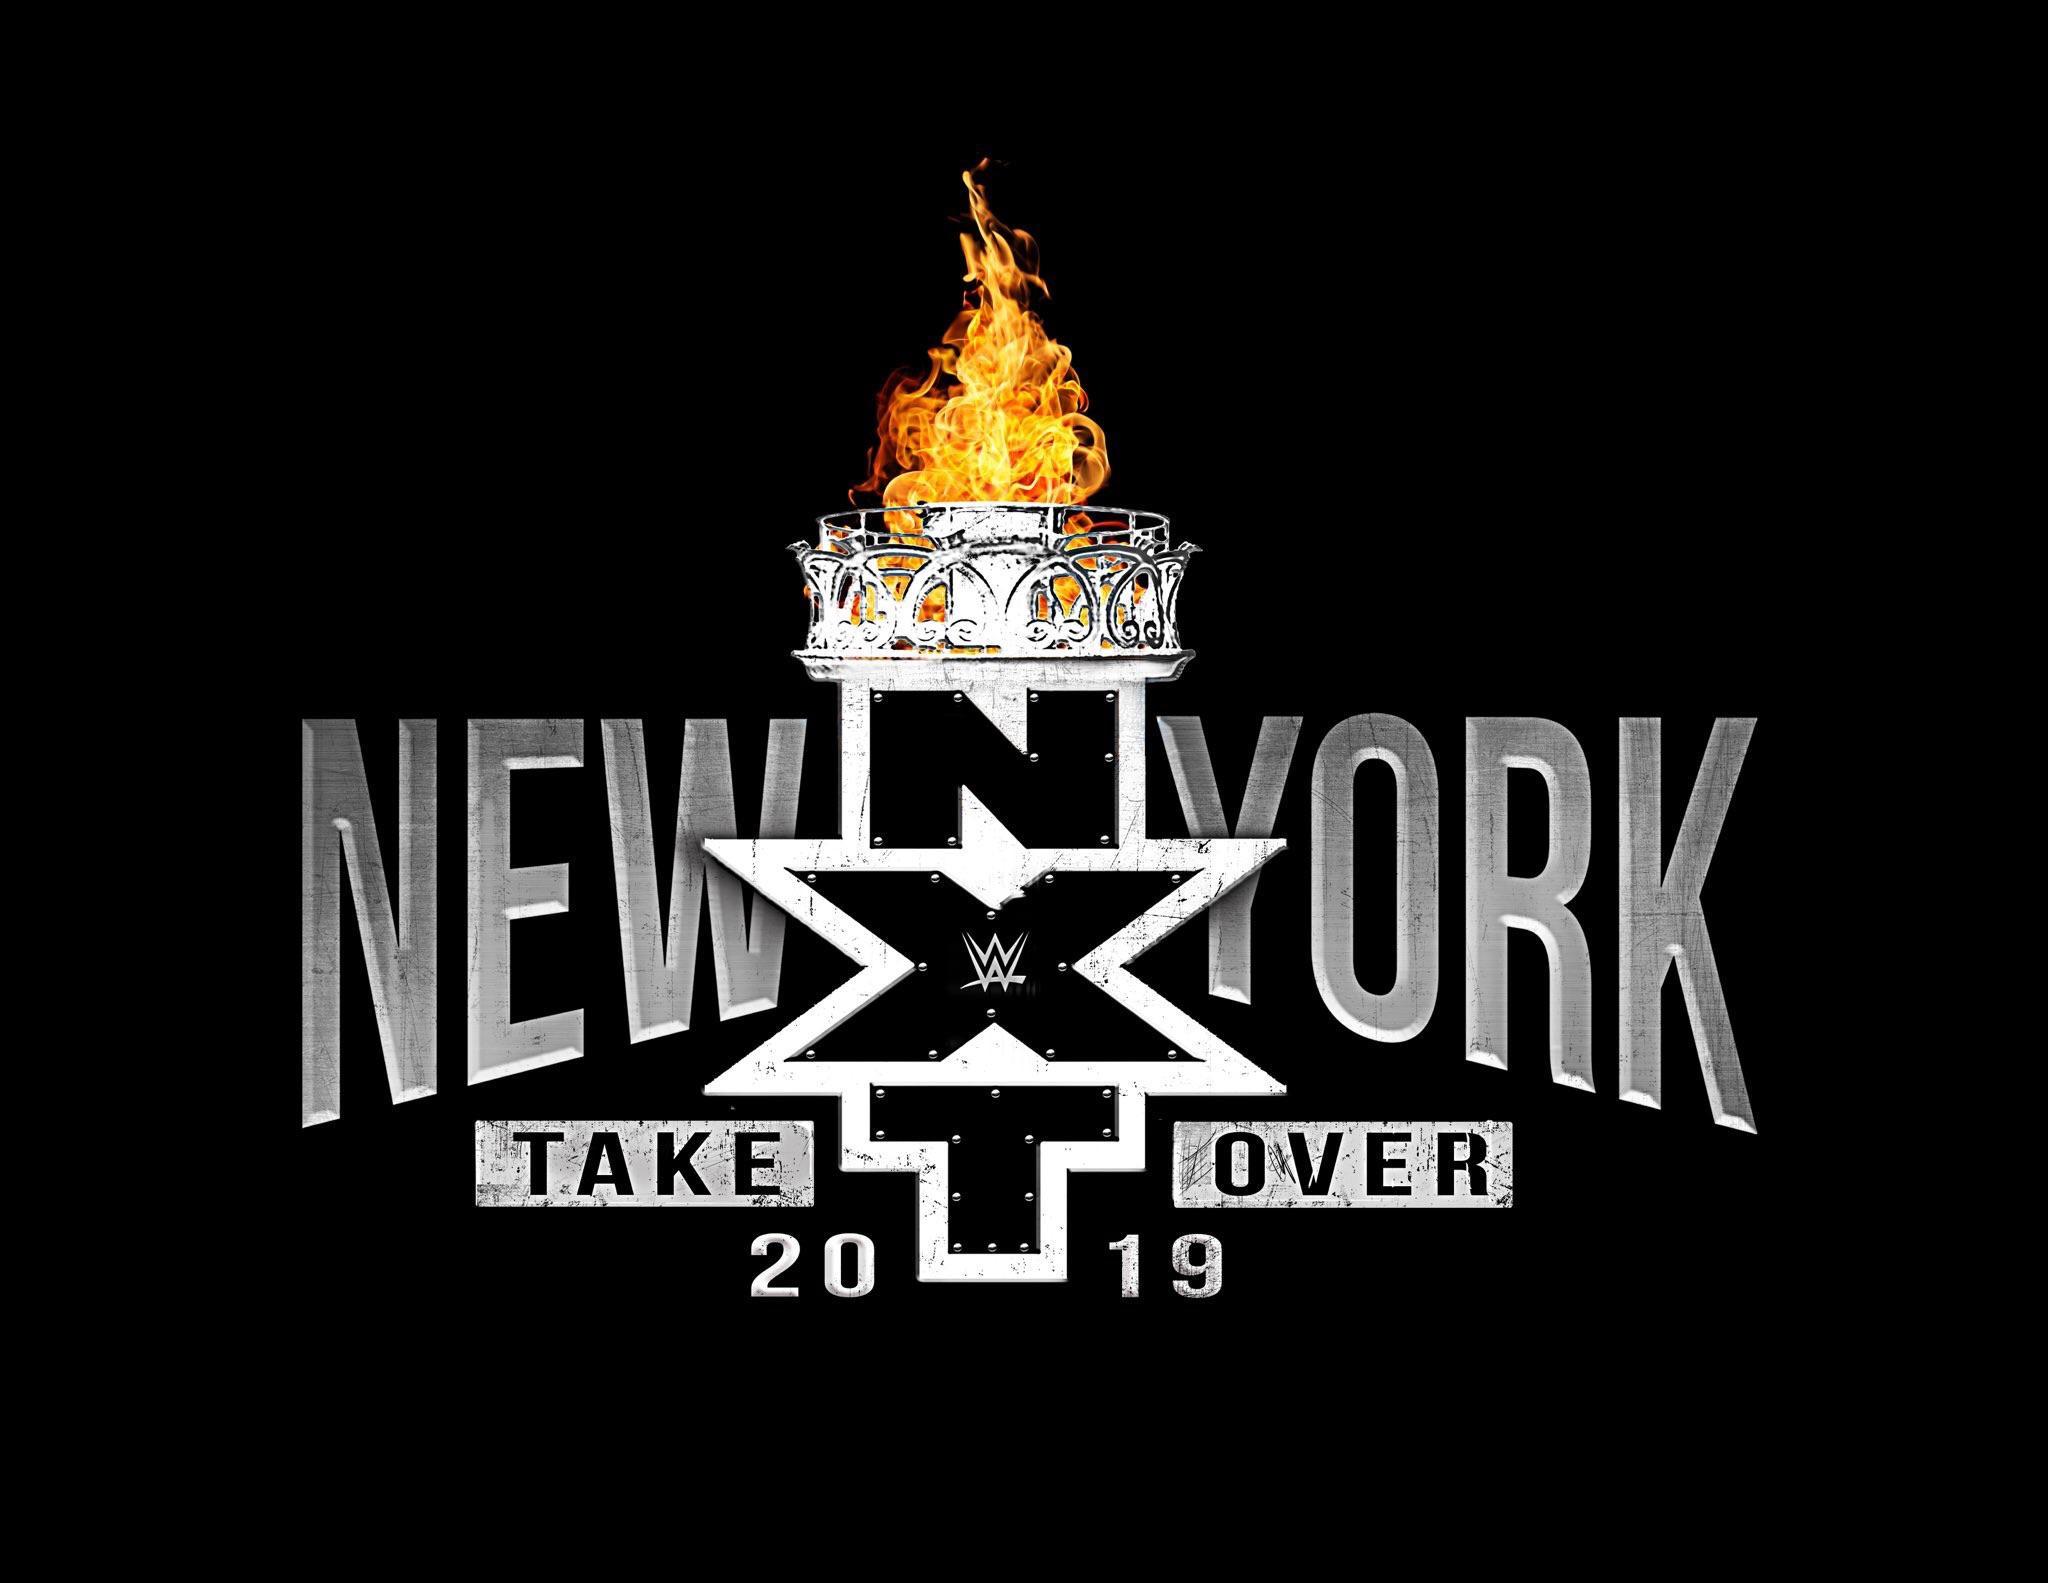 Takeover Logo - The logo for NXT Takeover: New York!